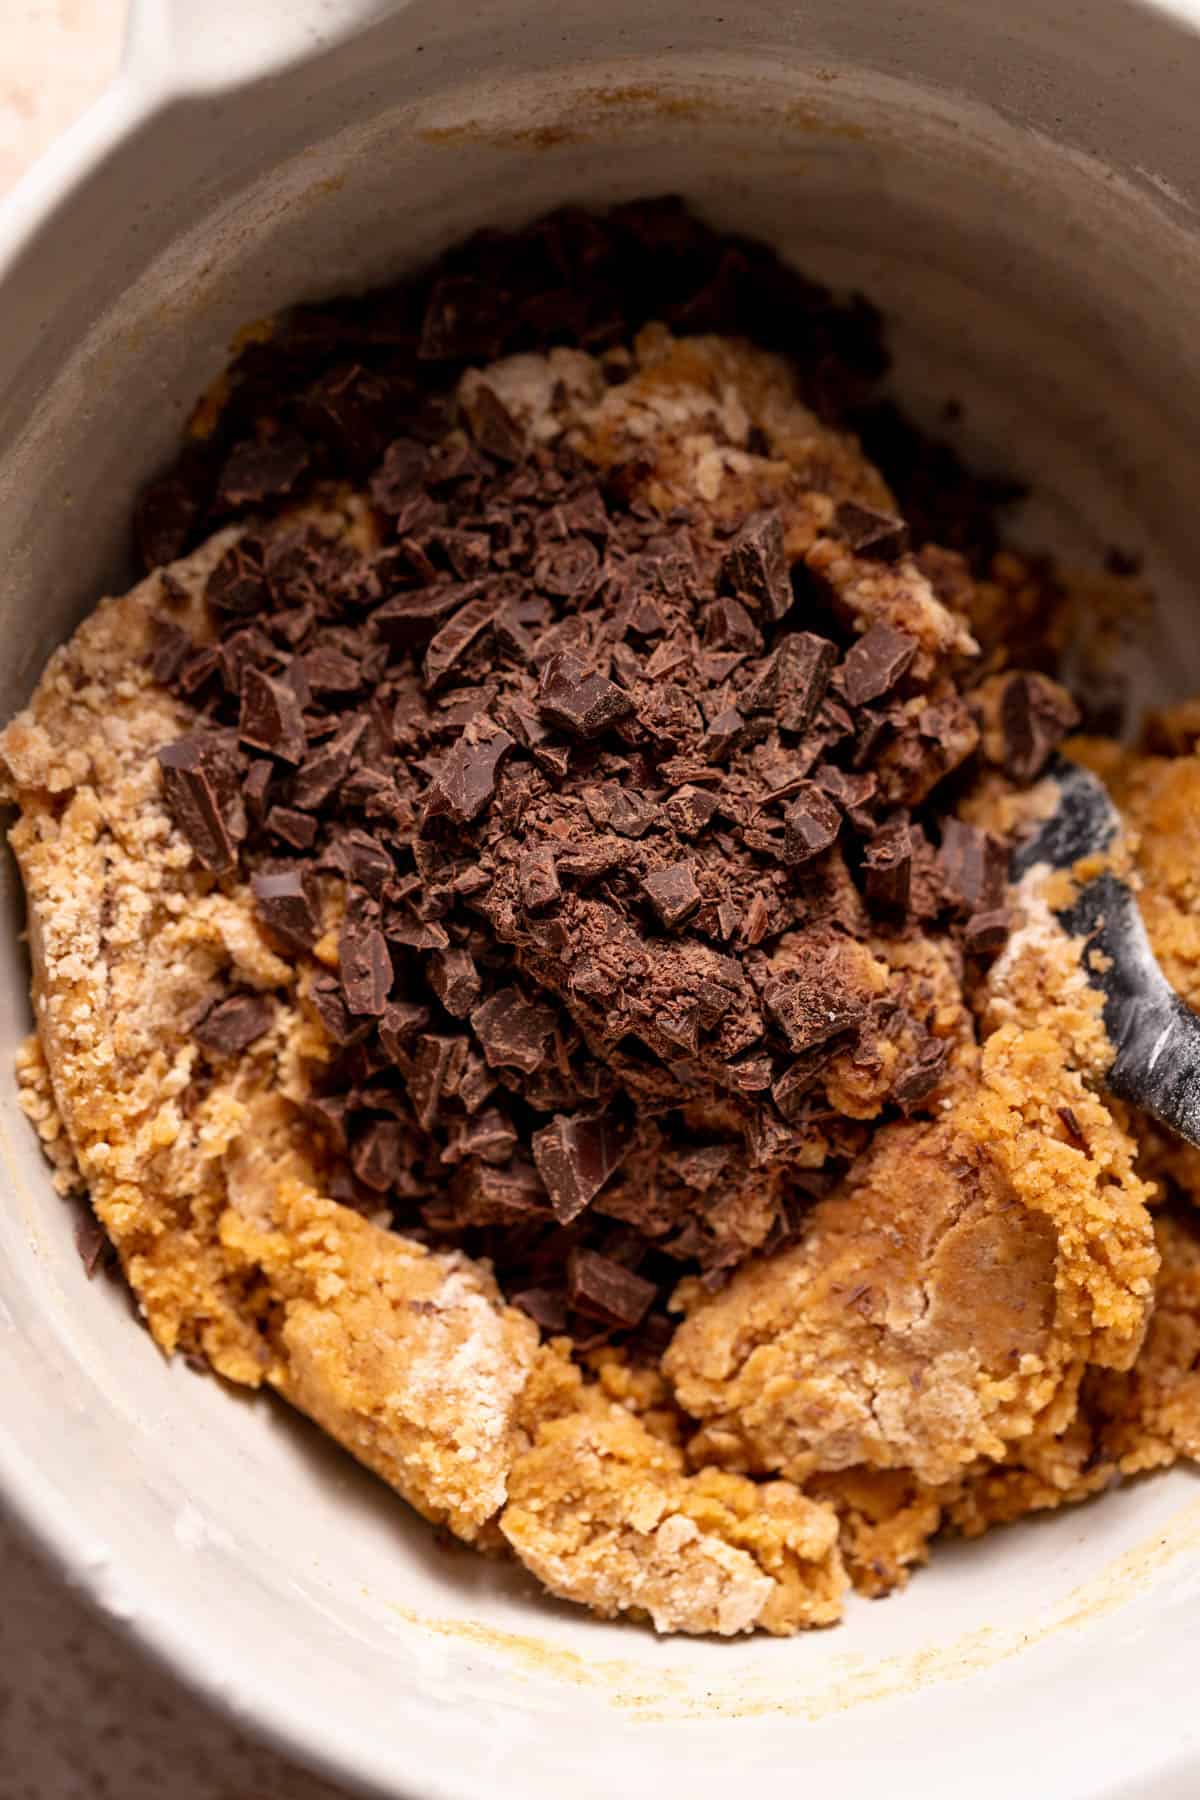 A mixing bowl of the pumpkin cookie dough with the chocolate chips on top before mixing.